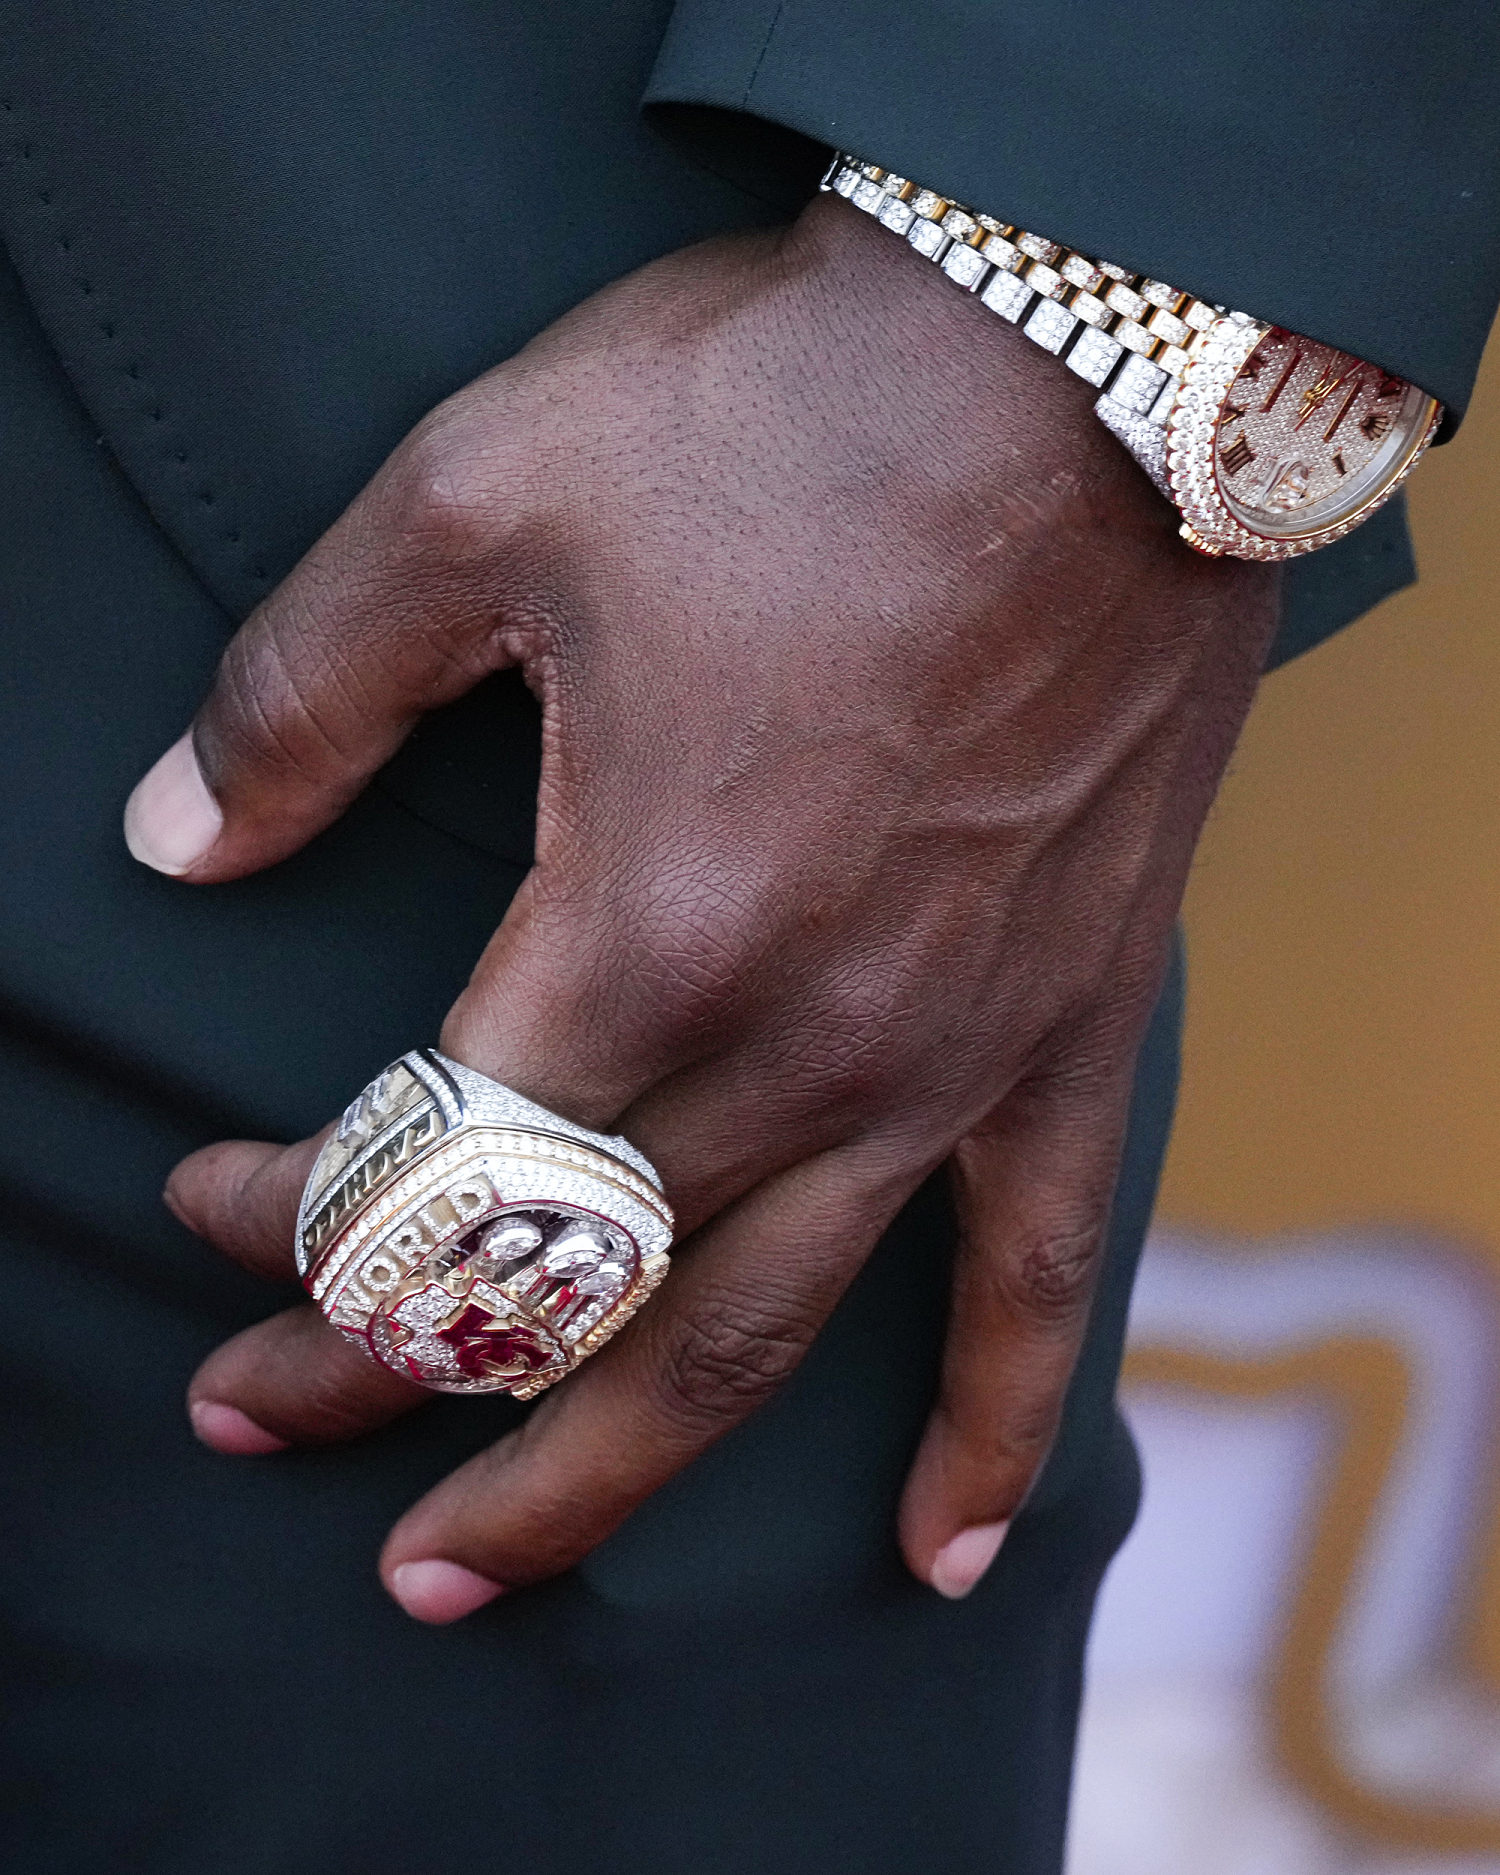 Kansas City Chiefs' $40,000 Super Bowl rings appear to have typo